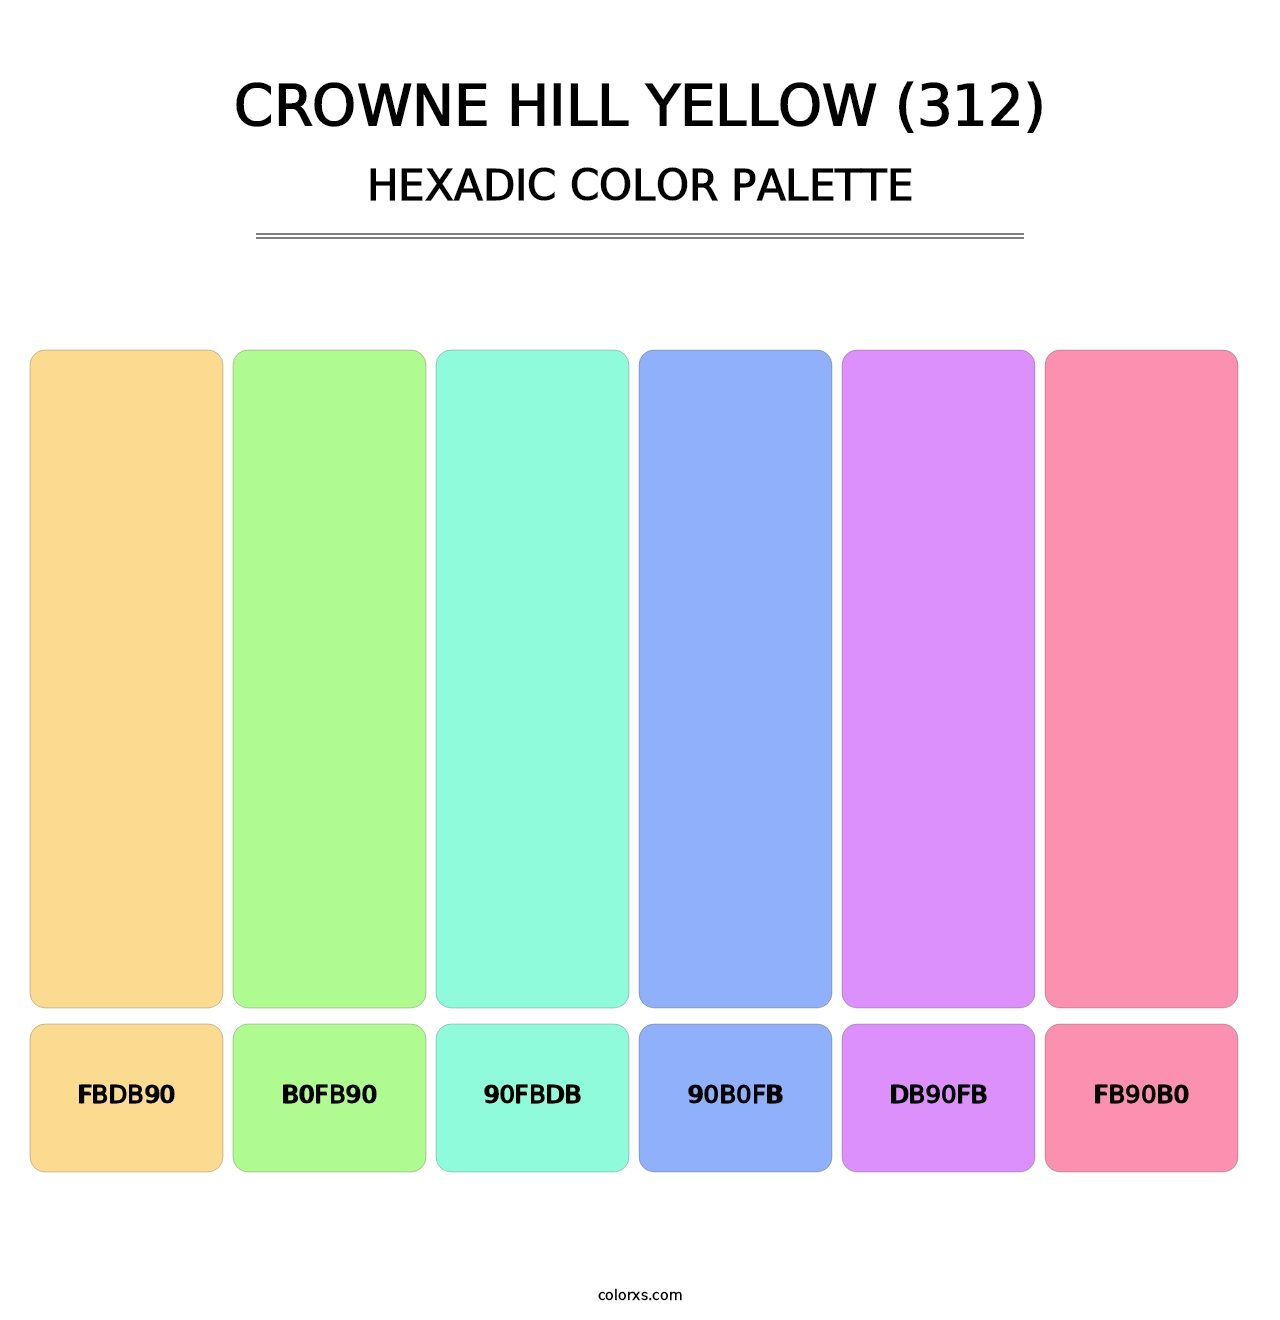 Crowne Hill Yellow (312) - Hexadic Color Palette